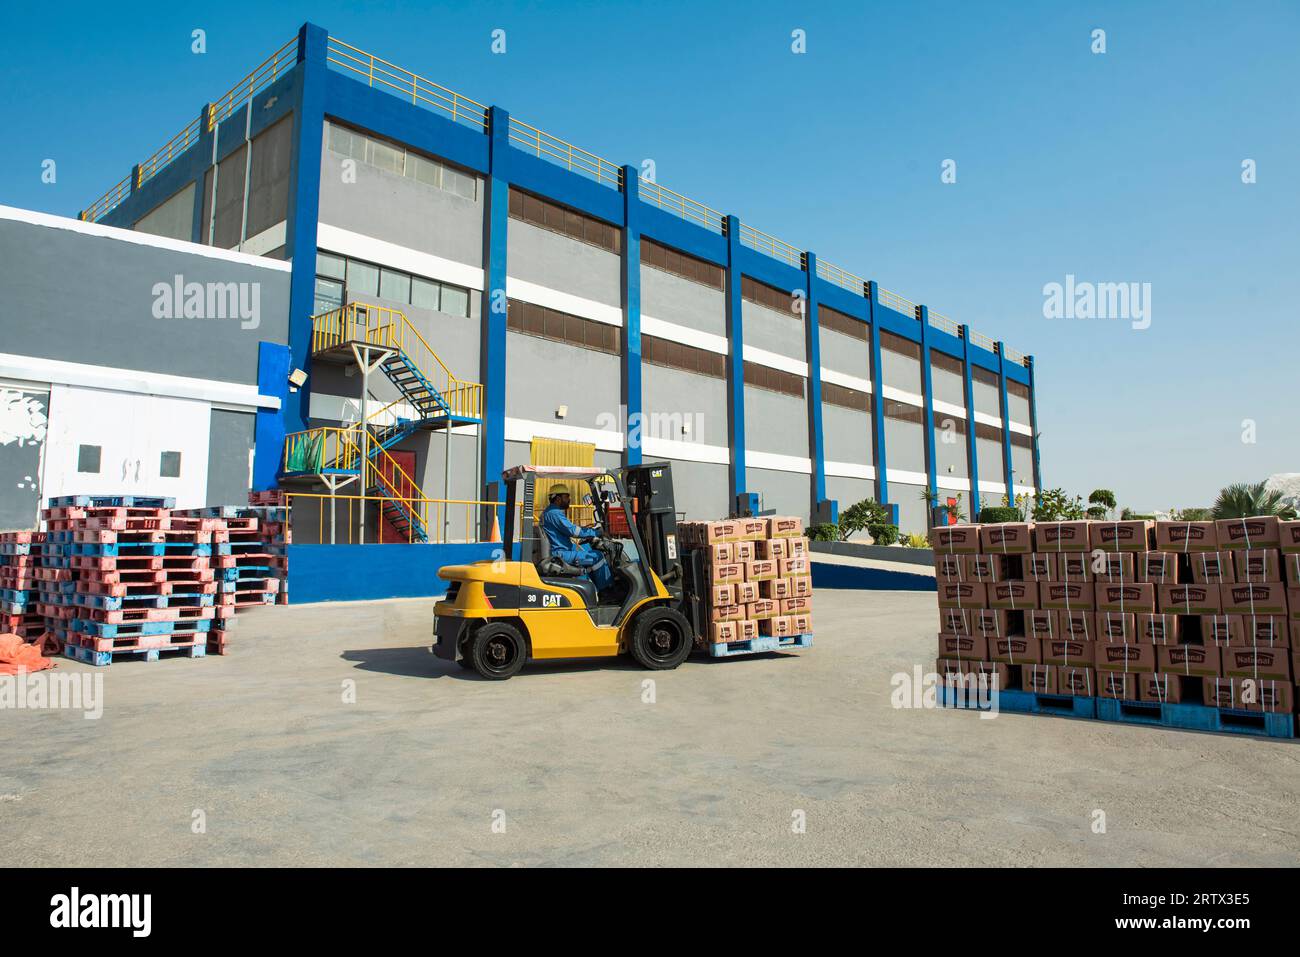 Forklift Truck working at Warehouse Stock Photo